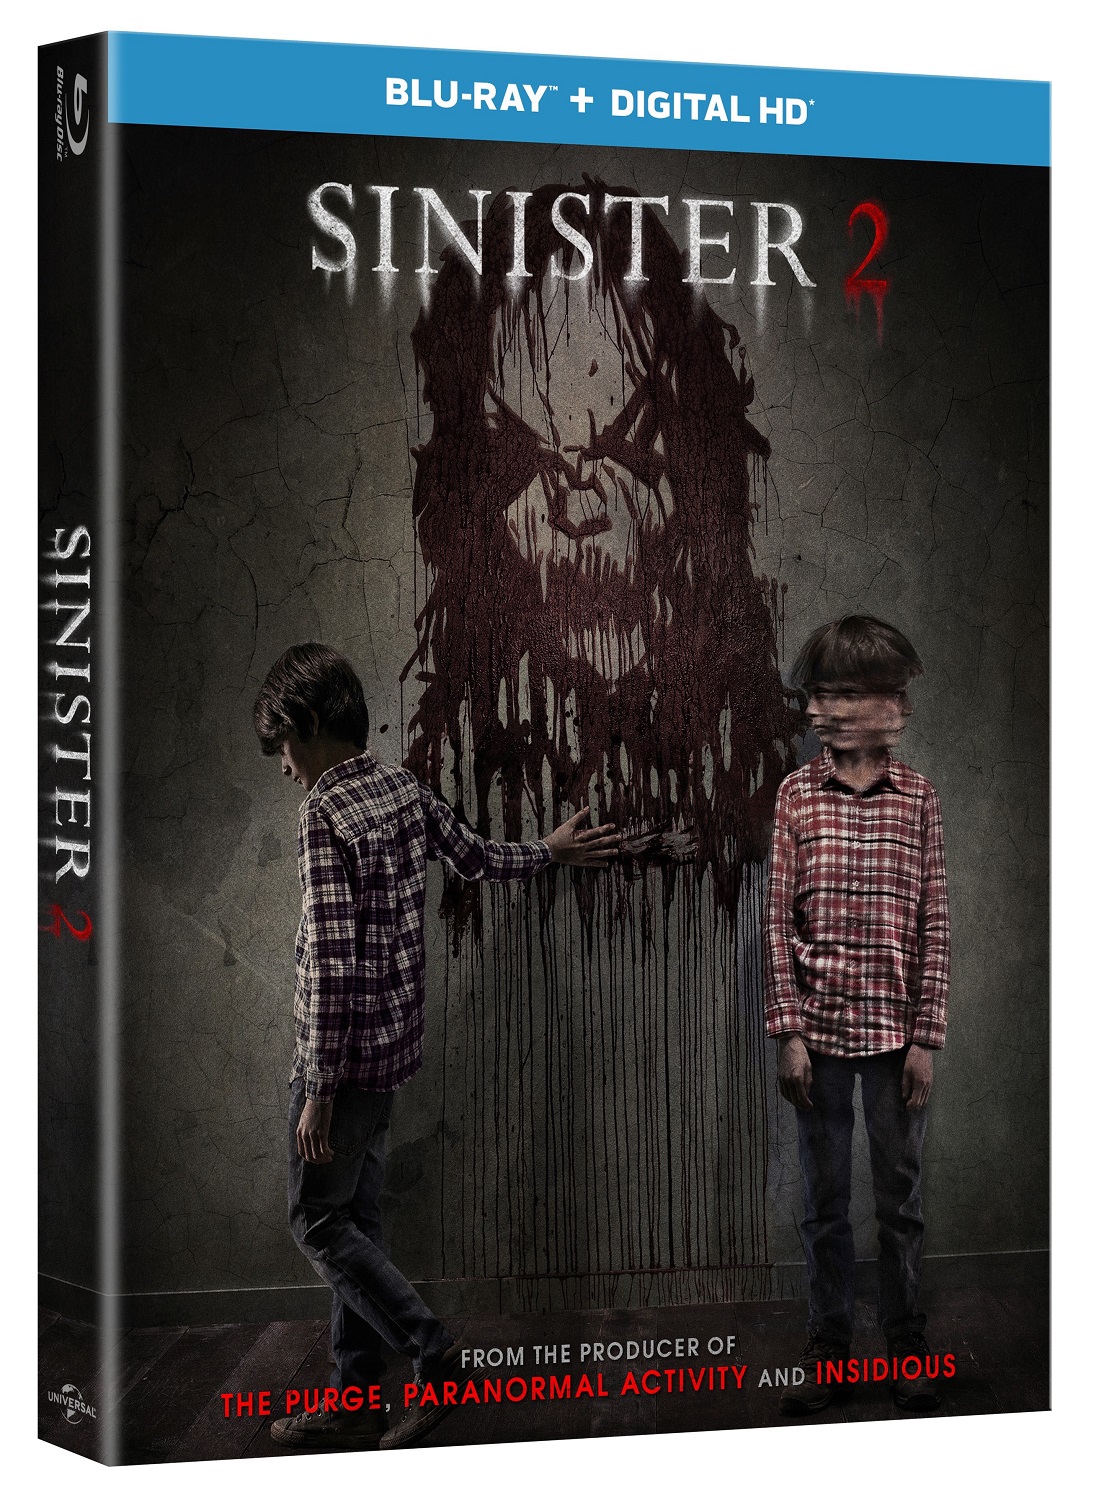 Sinister 2 Arrives On Blu-Ray!